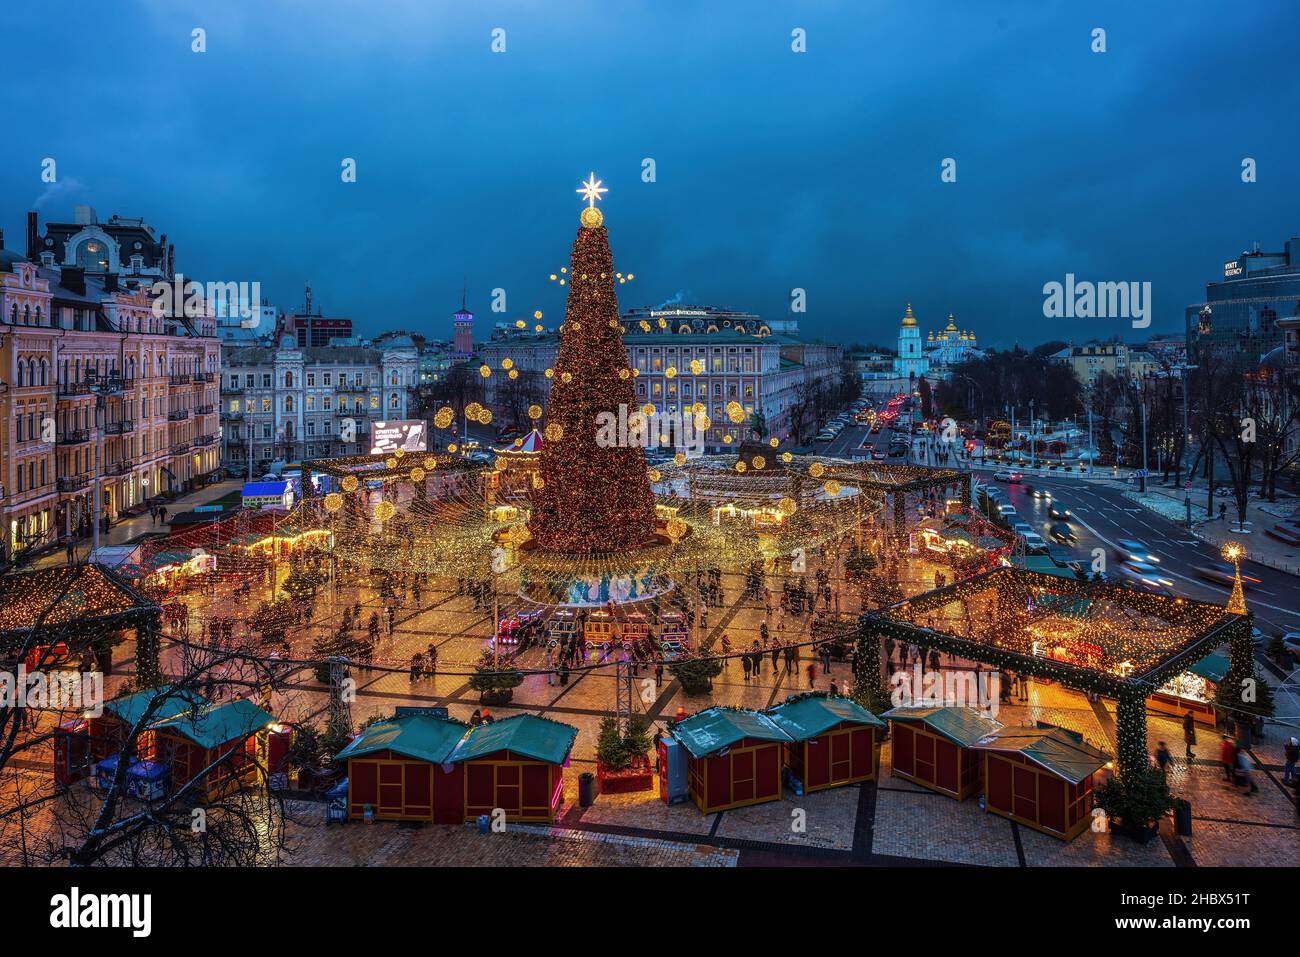 Celebration of Christmas and New Year 2021 in styles of Fabulous Forest with Christmas tree of 31 meters at the St.Sophia Square Stock Photo